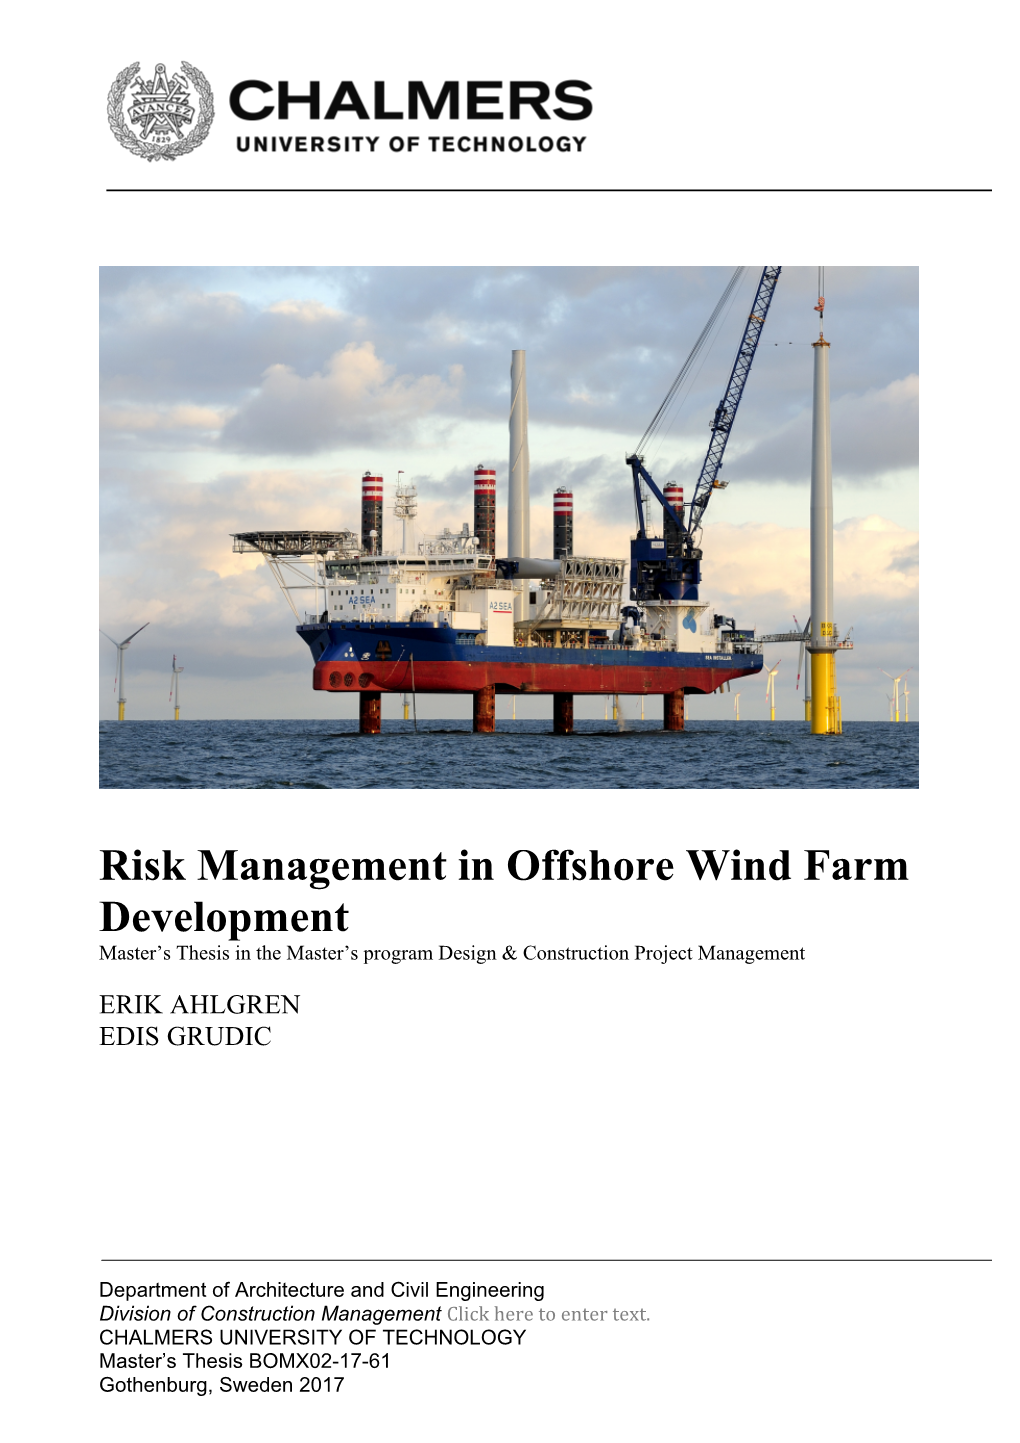 Risk Management in Offshore Wind Farm Development Master’S Thesis in the Master’S Program Design & Construction Project Management